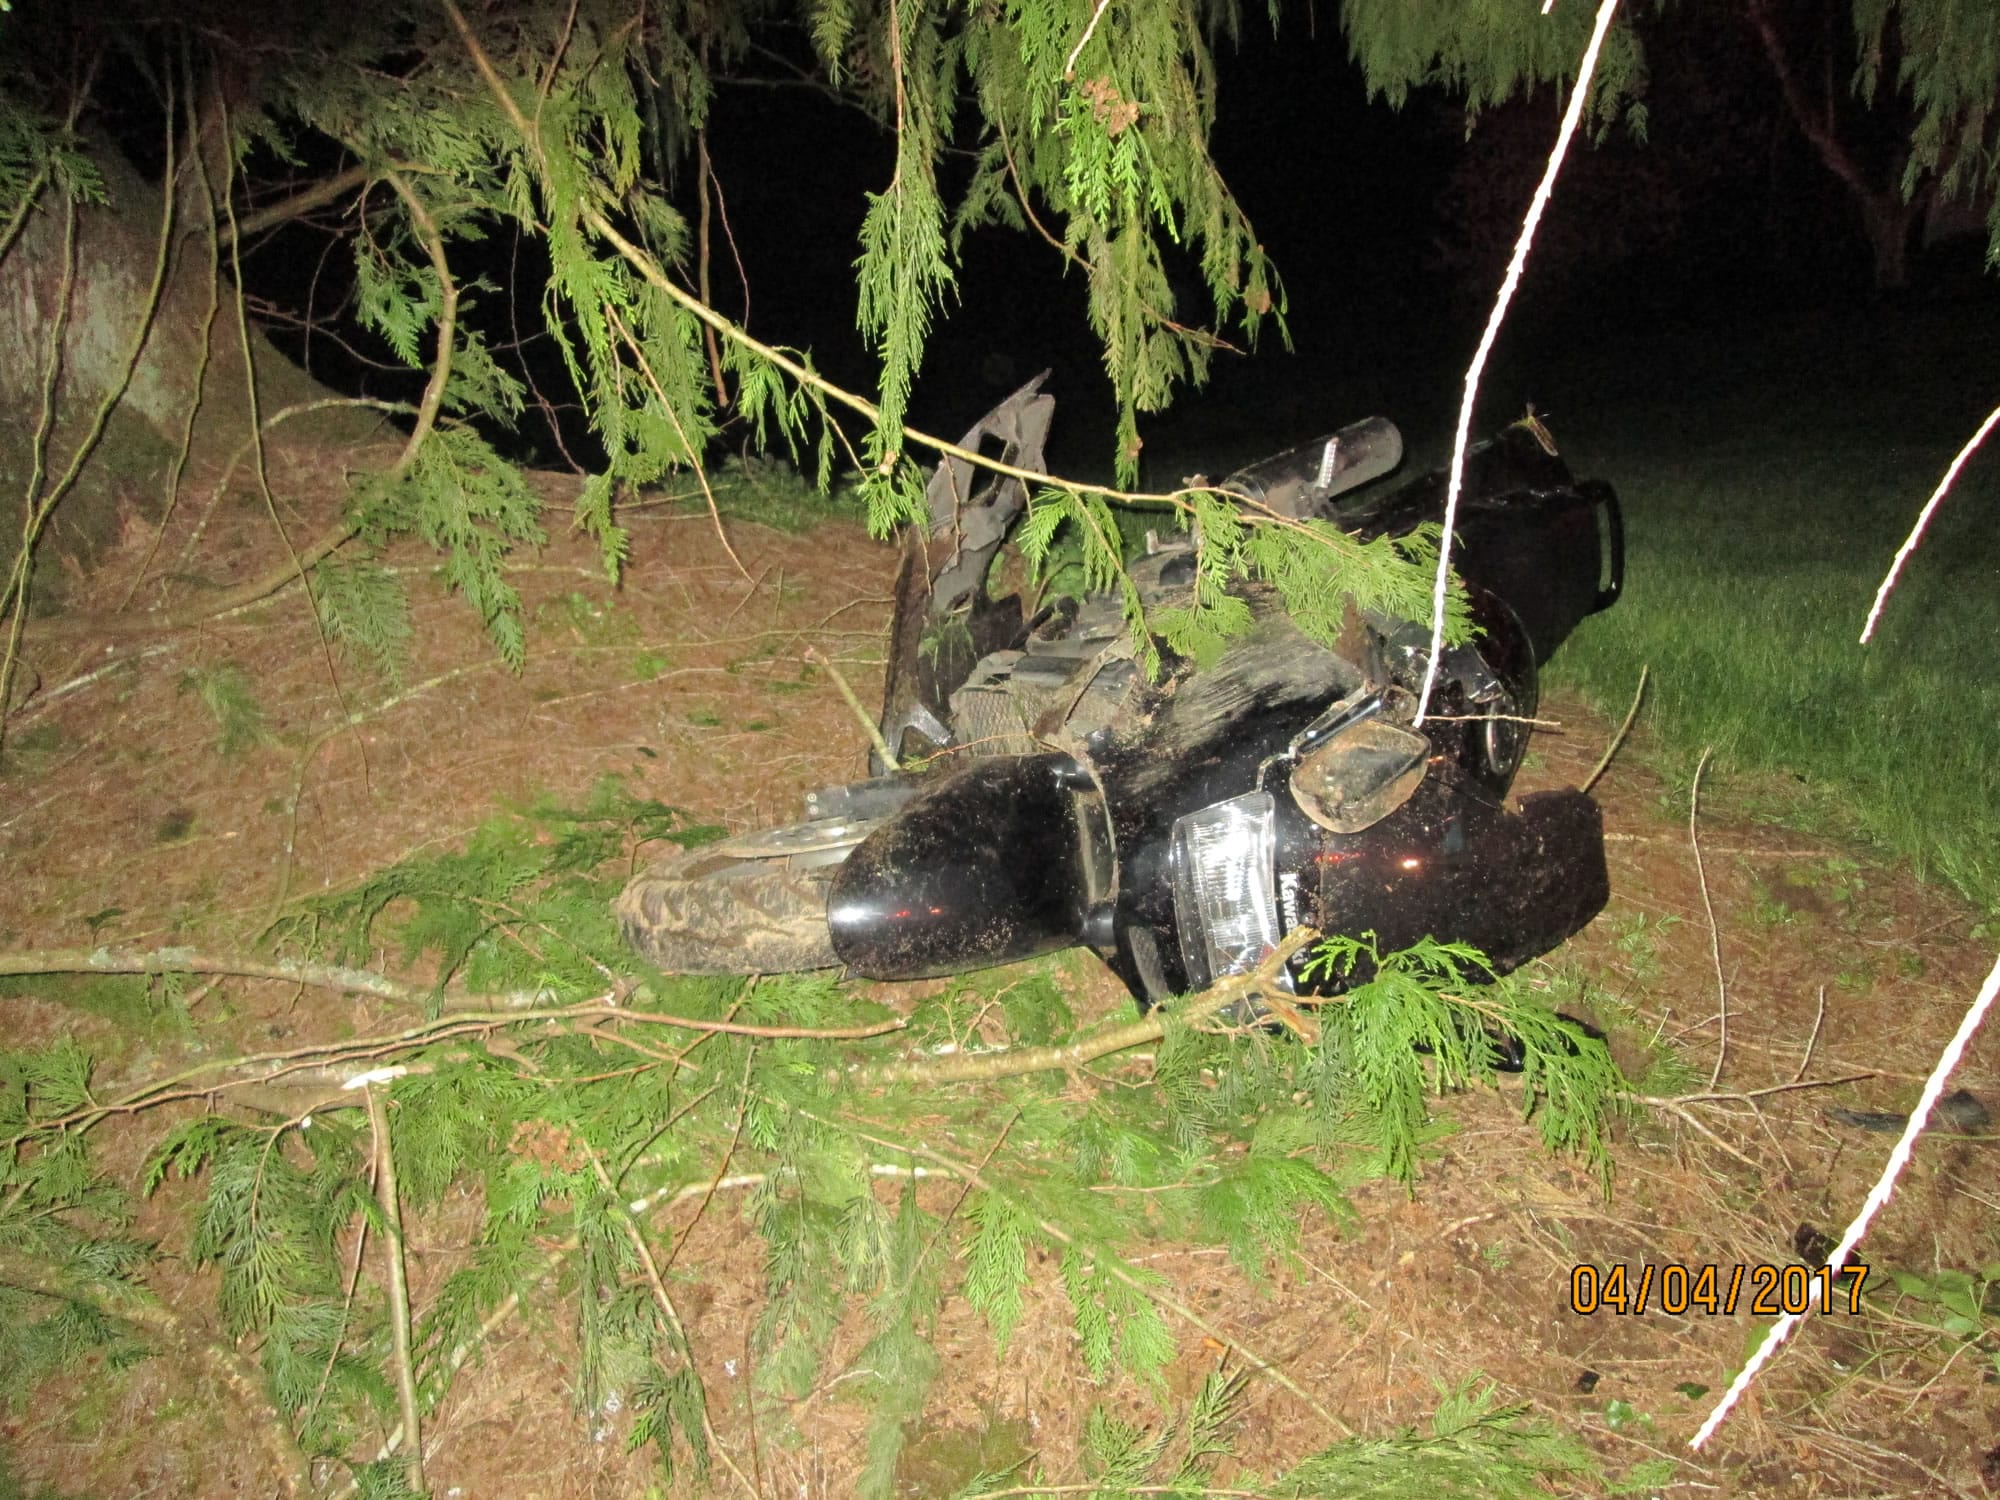 A motorcycle lies near a tree at the scene of a Tuesday night crash.